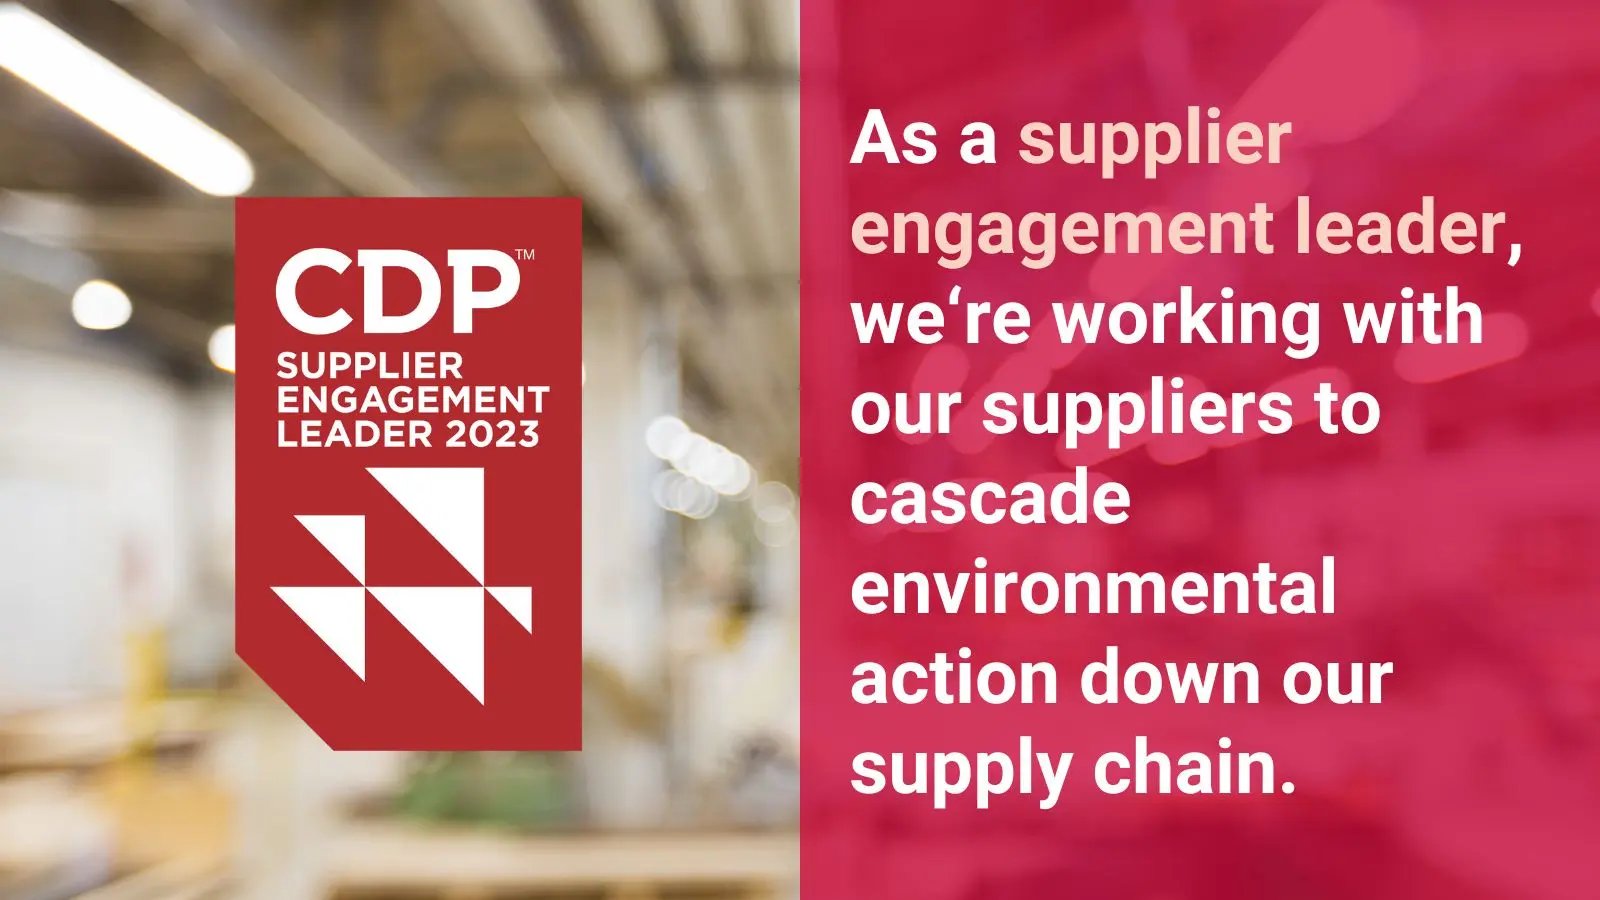 As a supplier engagement leader, we're working with our suppliers to cascade environmental action down our supply chain